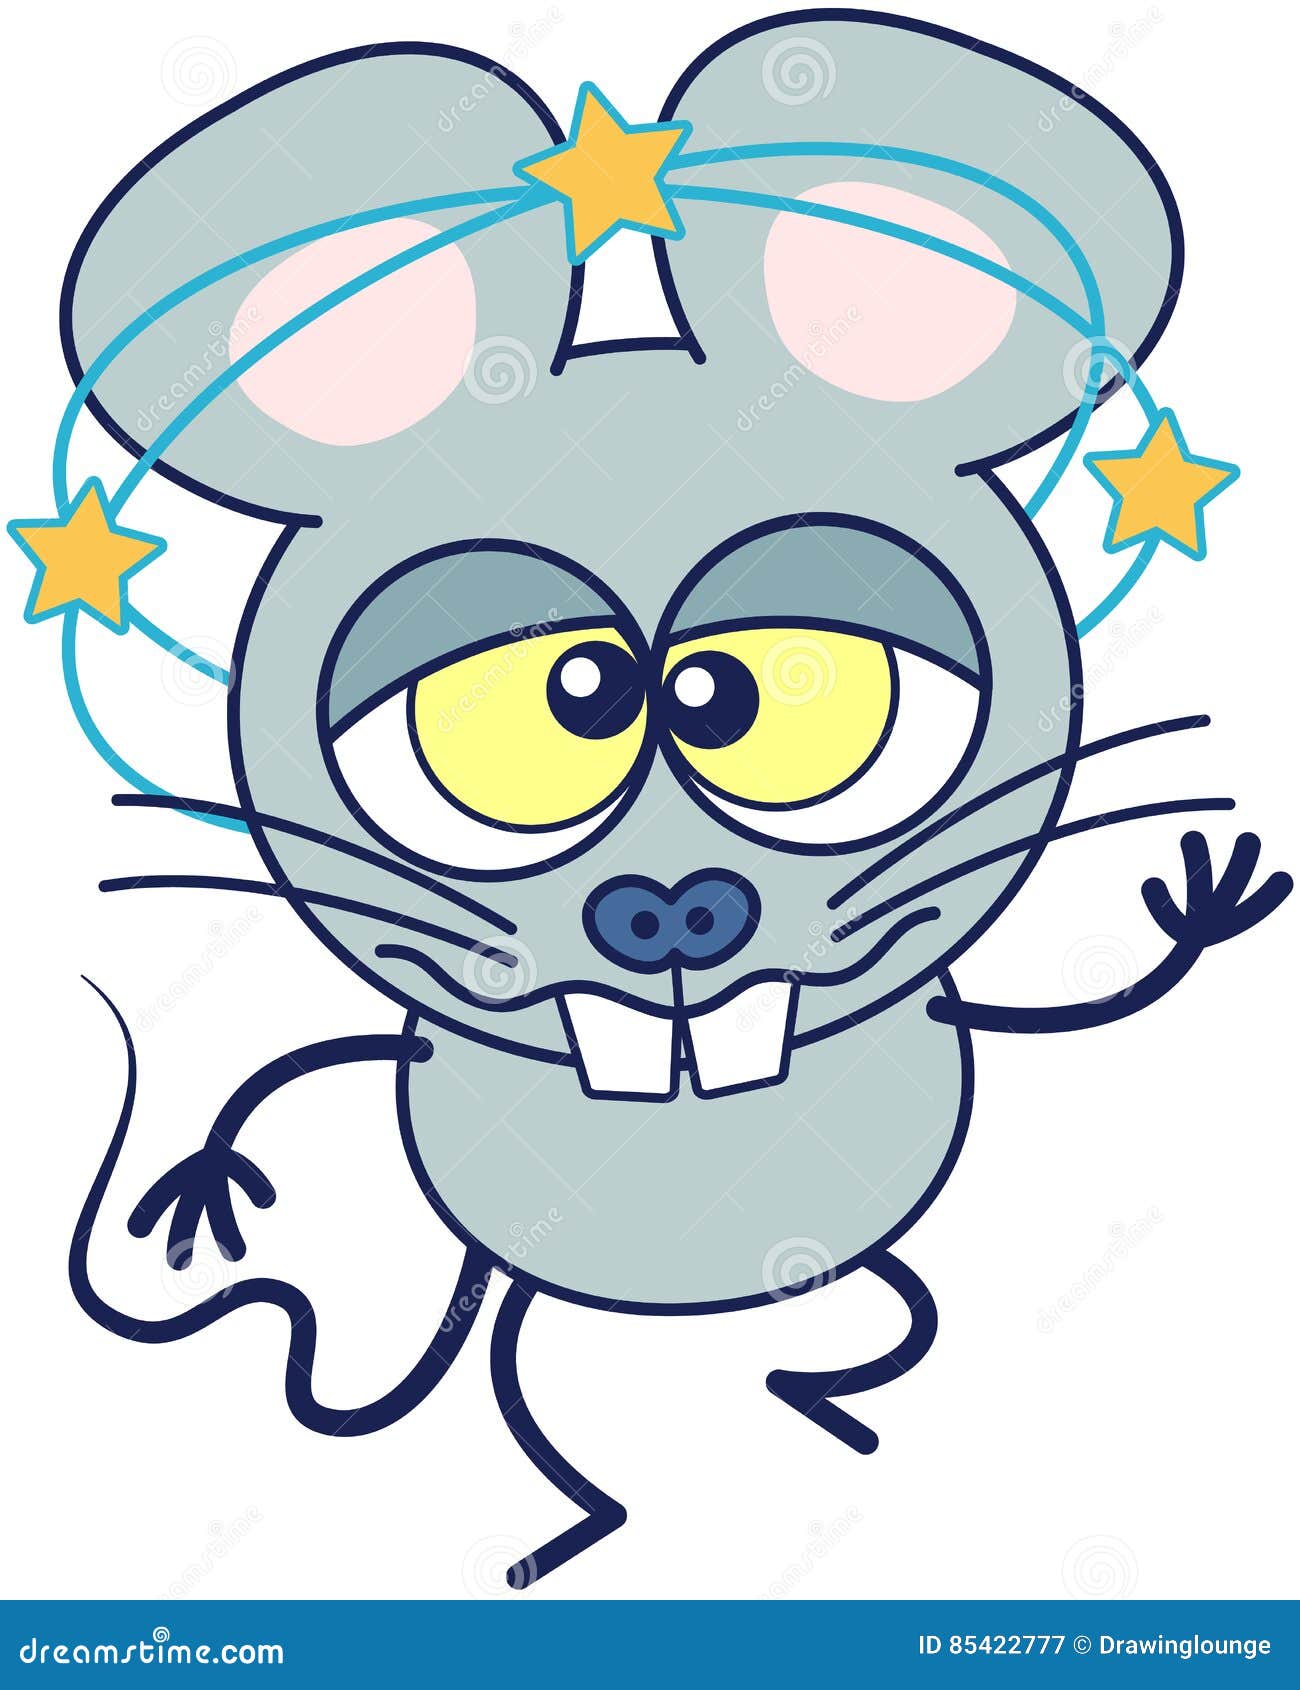 Cute Mouse Feeling Extremely Dizzy Stock Vector - Illustration of adorable,  mouse: 85422777